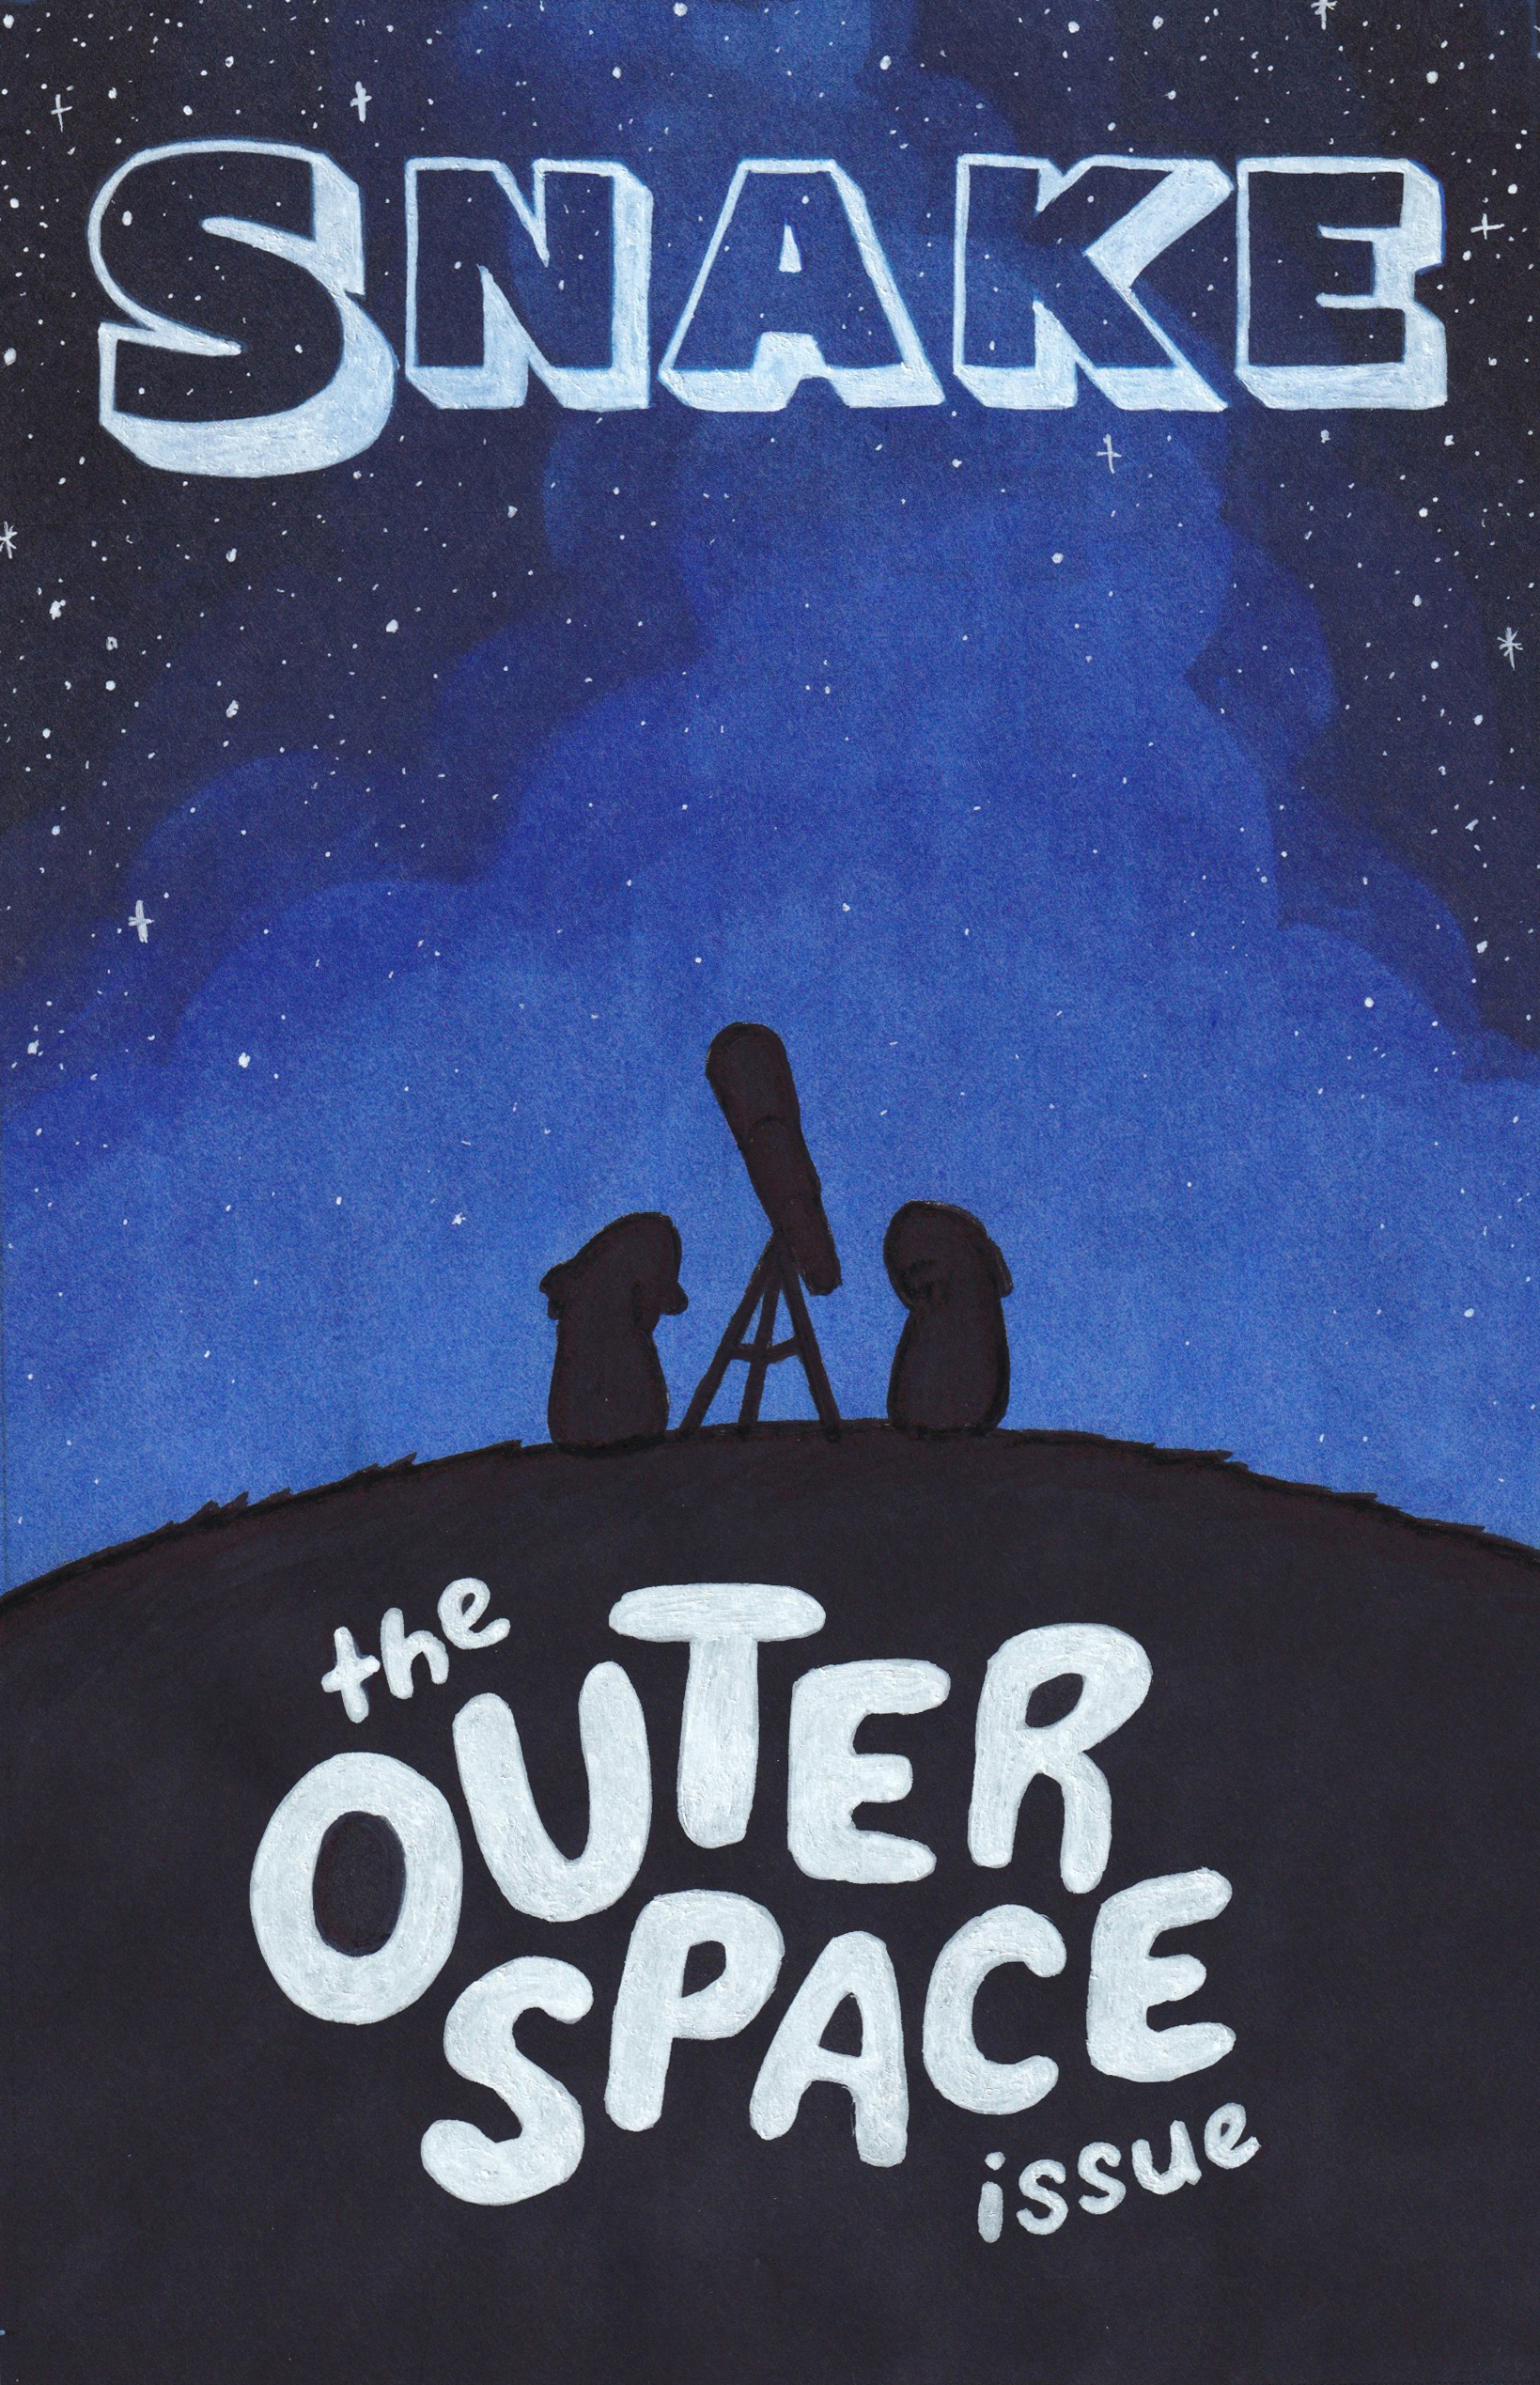 The cover of the Outer Space Issue, showing two guinea pigs silhouetted on a hill with a telescope. Behind the guinea pigs is a starry blue night sky. At the top of the page is the word 